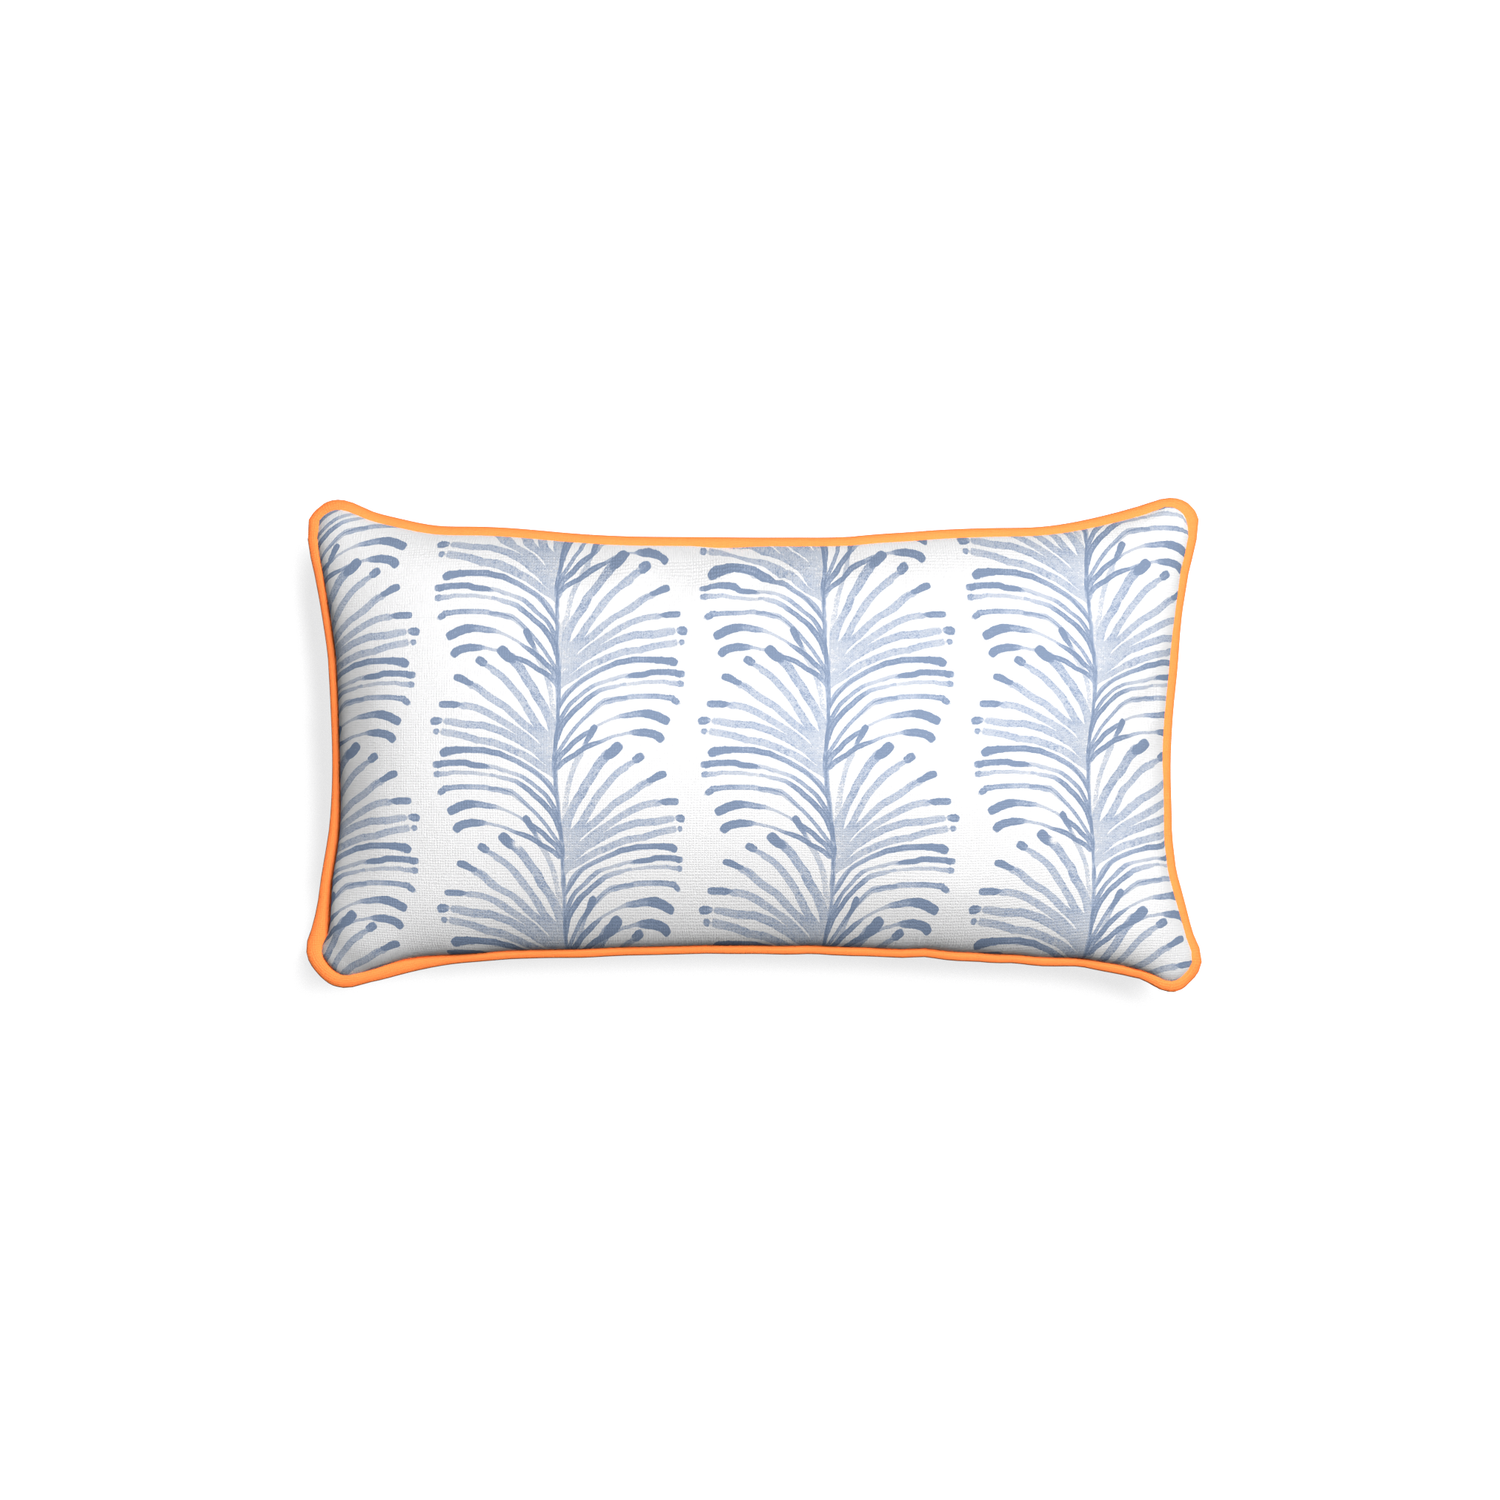 Petite-lumbar emma sky custom sky blue botanical stripepillow with clementine piping on white background